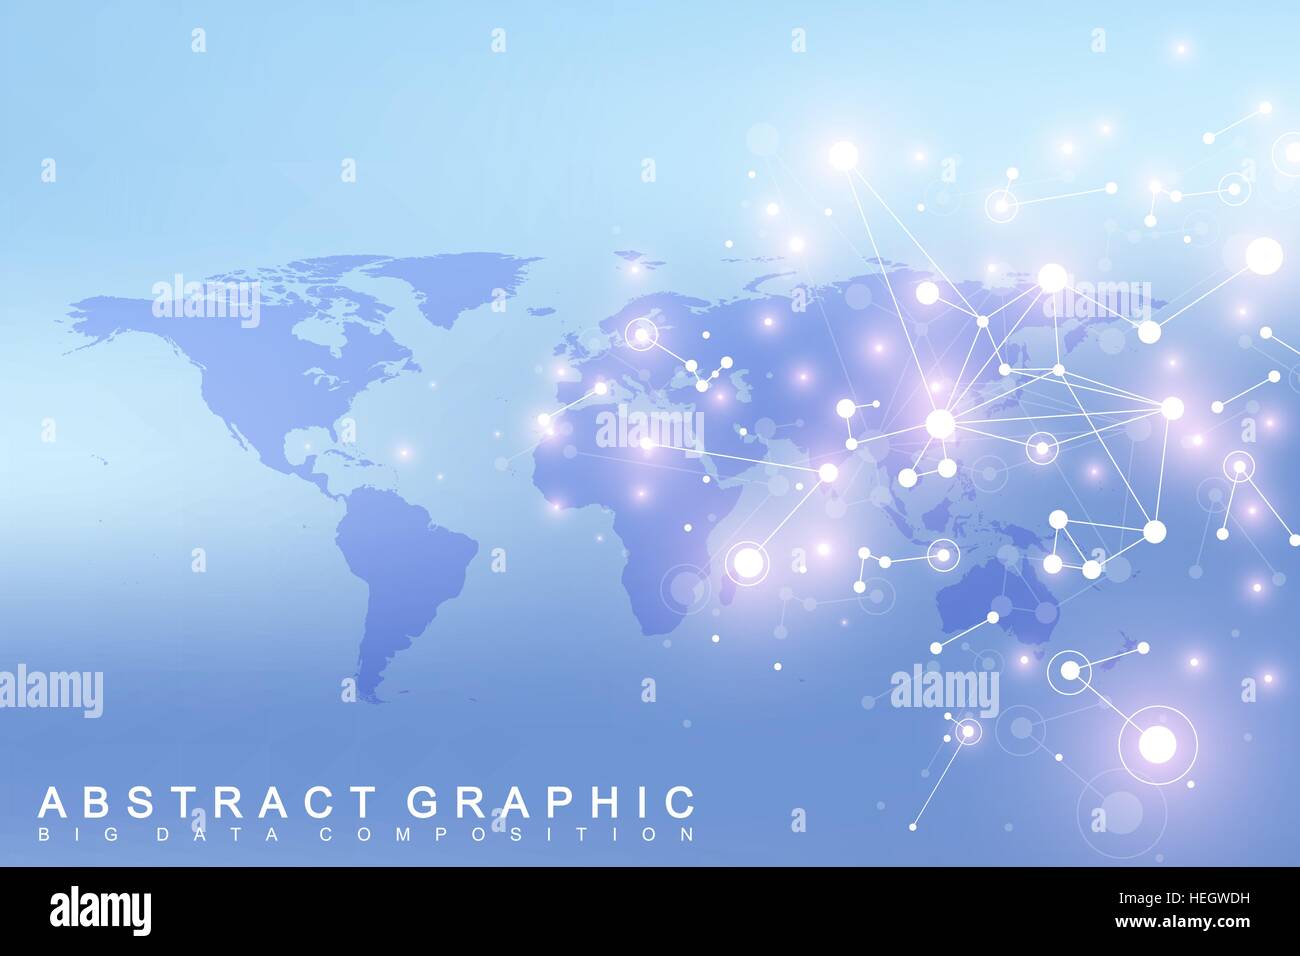 World map with global technology networking concept. Digital data visualization. Lines plexus. Big Data background communication. Scientific vector illustration. Stock Vector